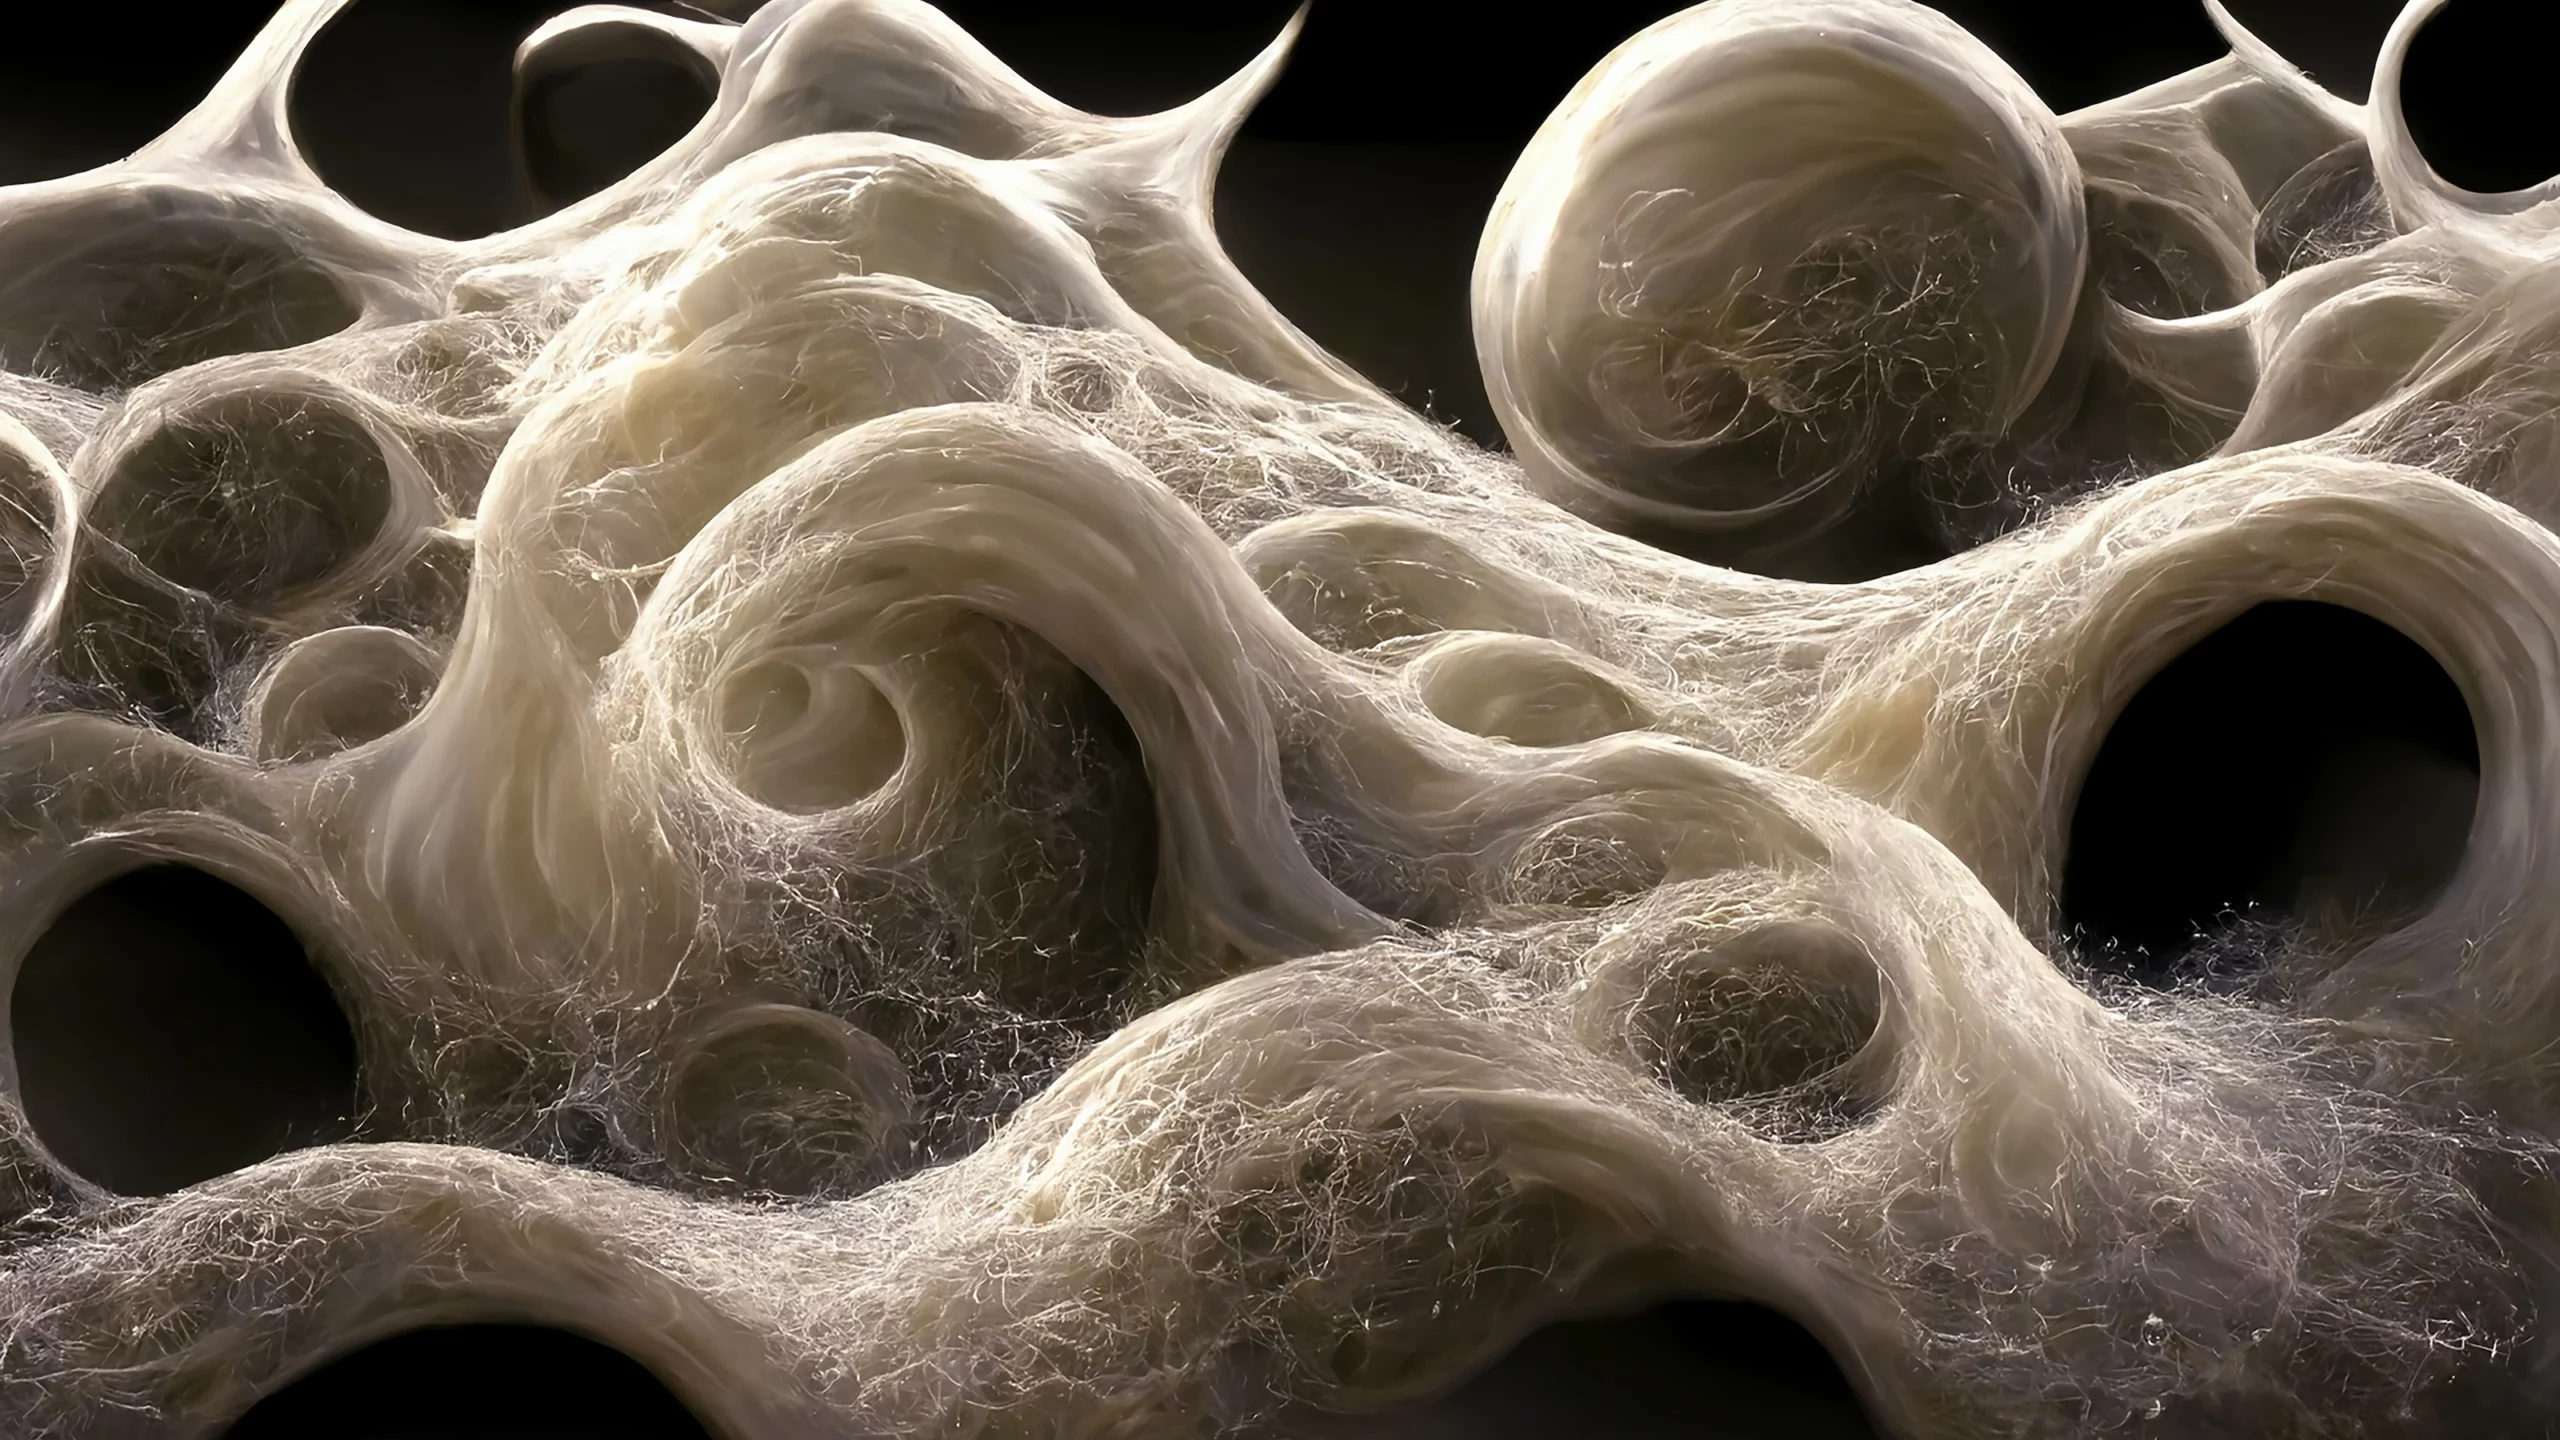 The concept of “nothingness” does not correspond to reality since there is a phenomenon known as “quantum foam.”